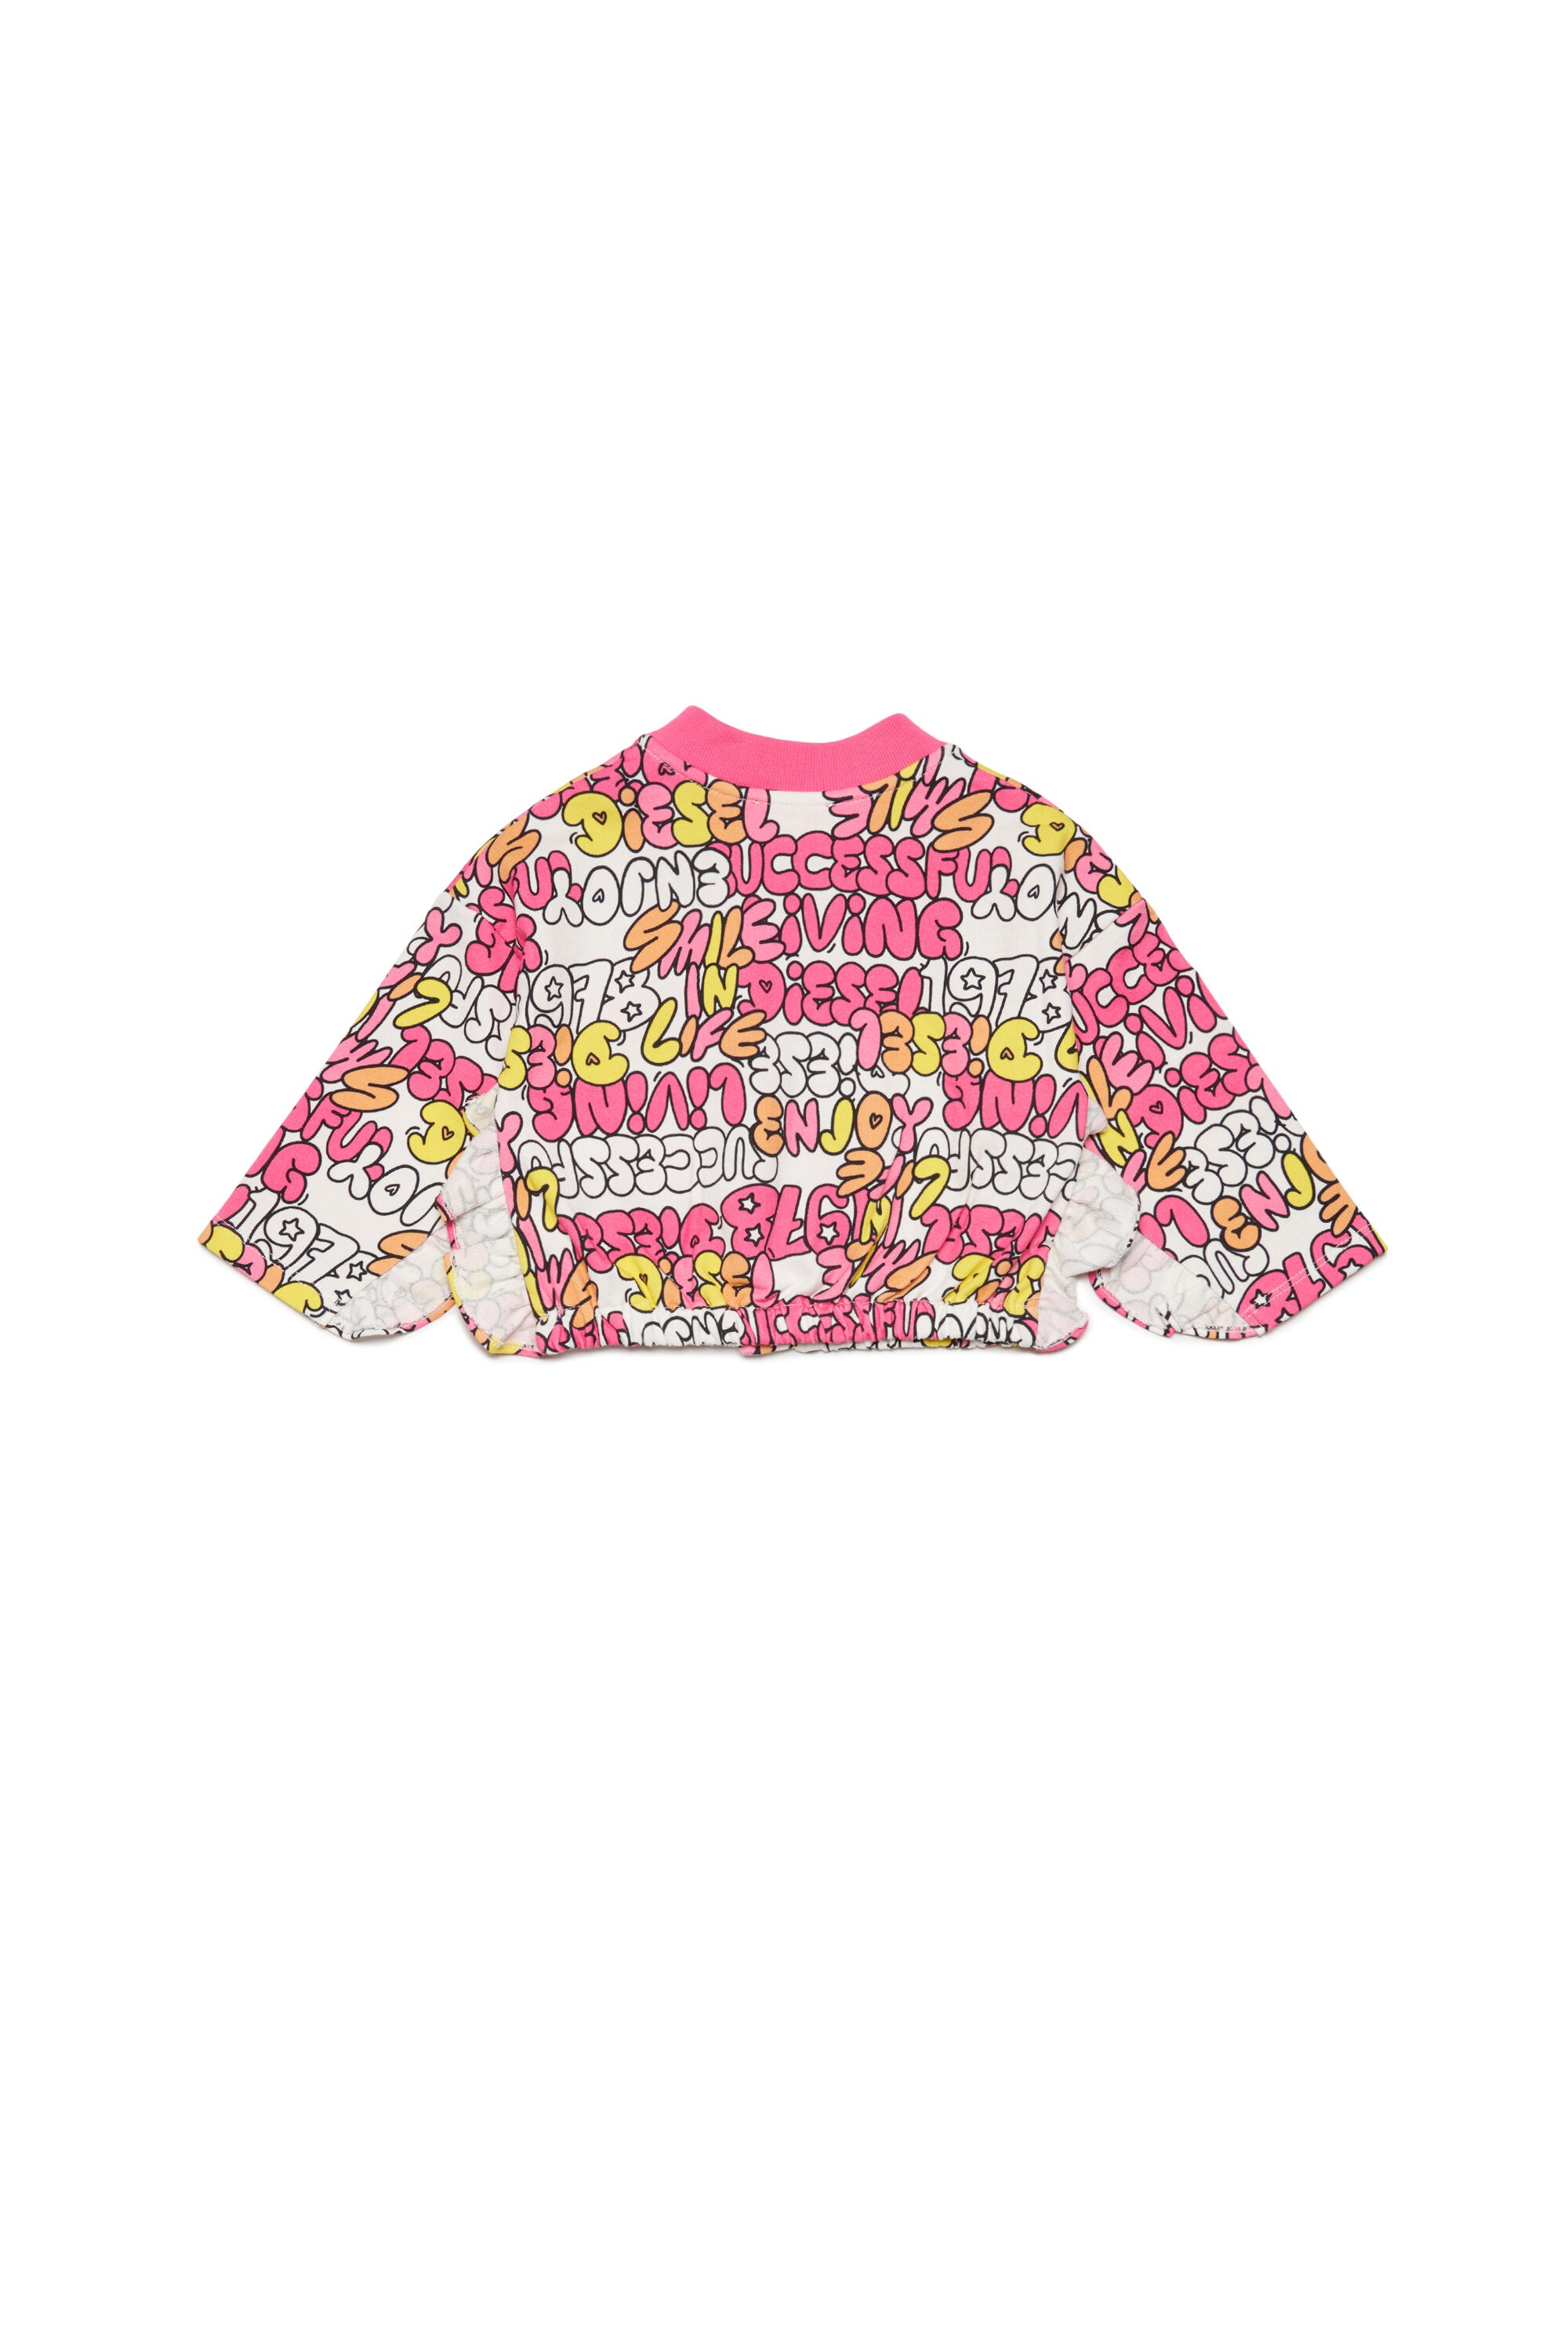 Sweatshirt with zip allover bubble text